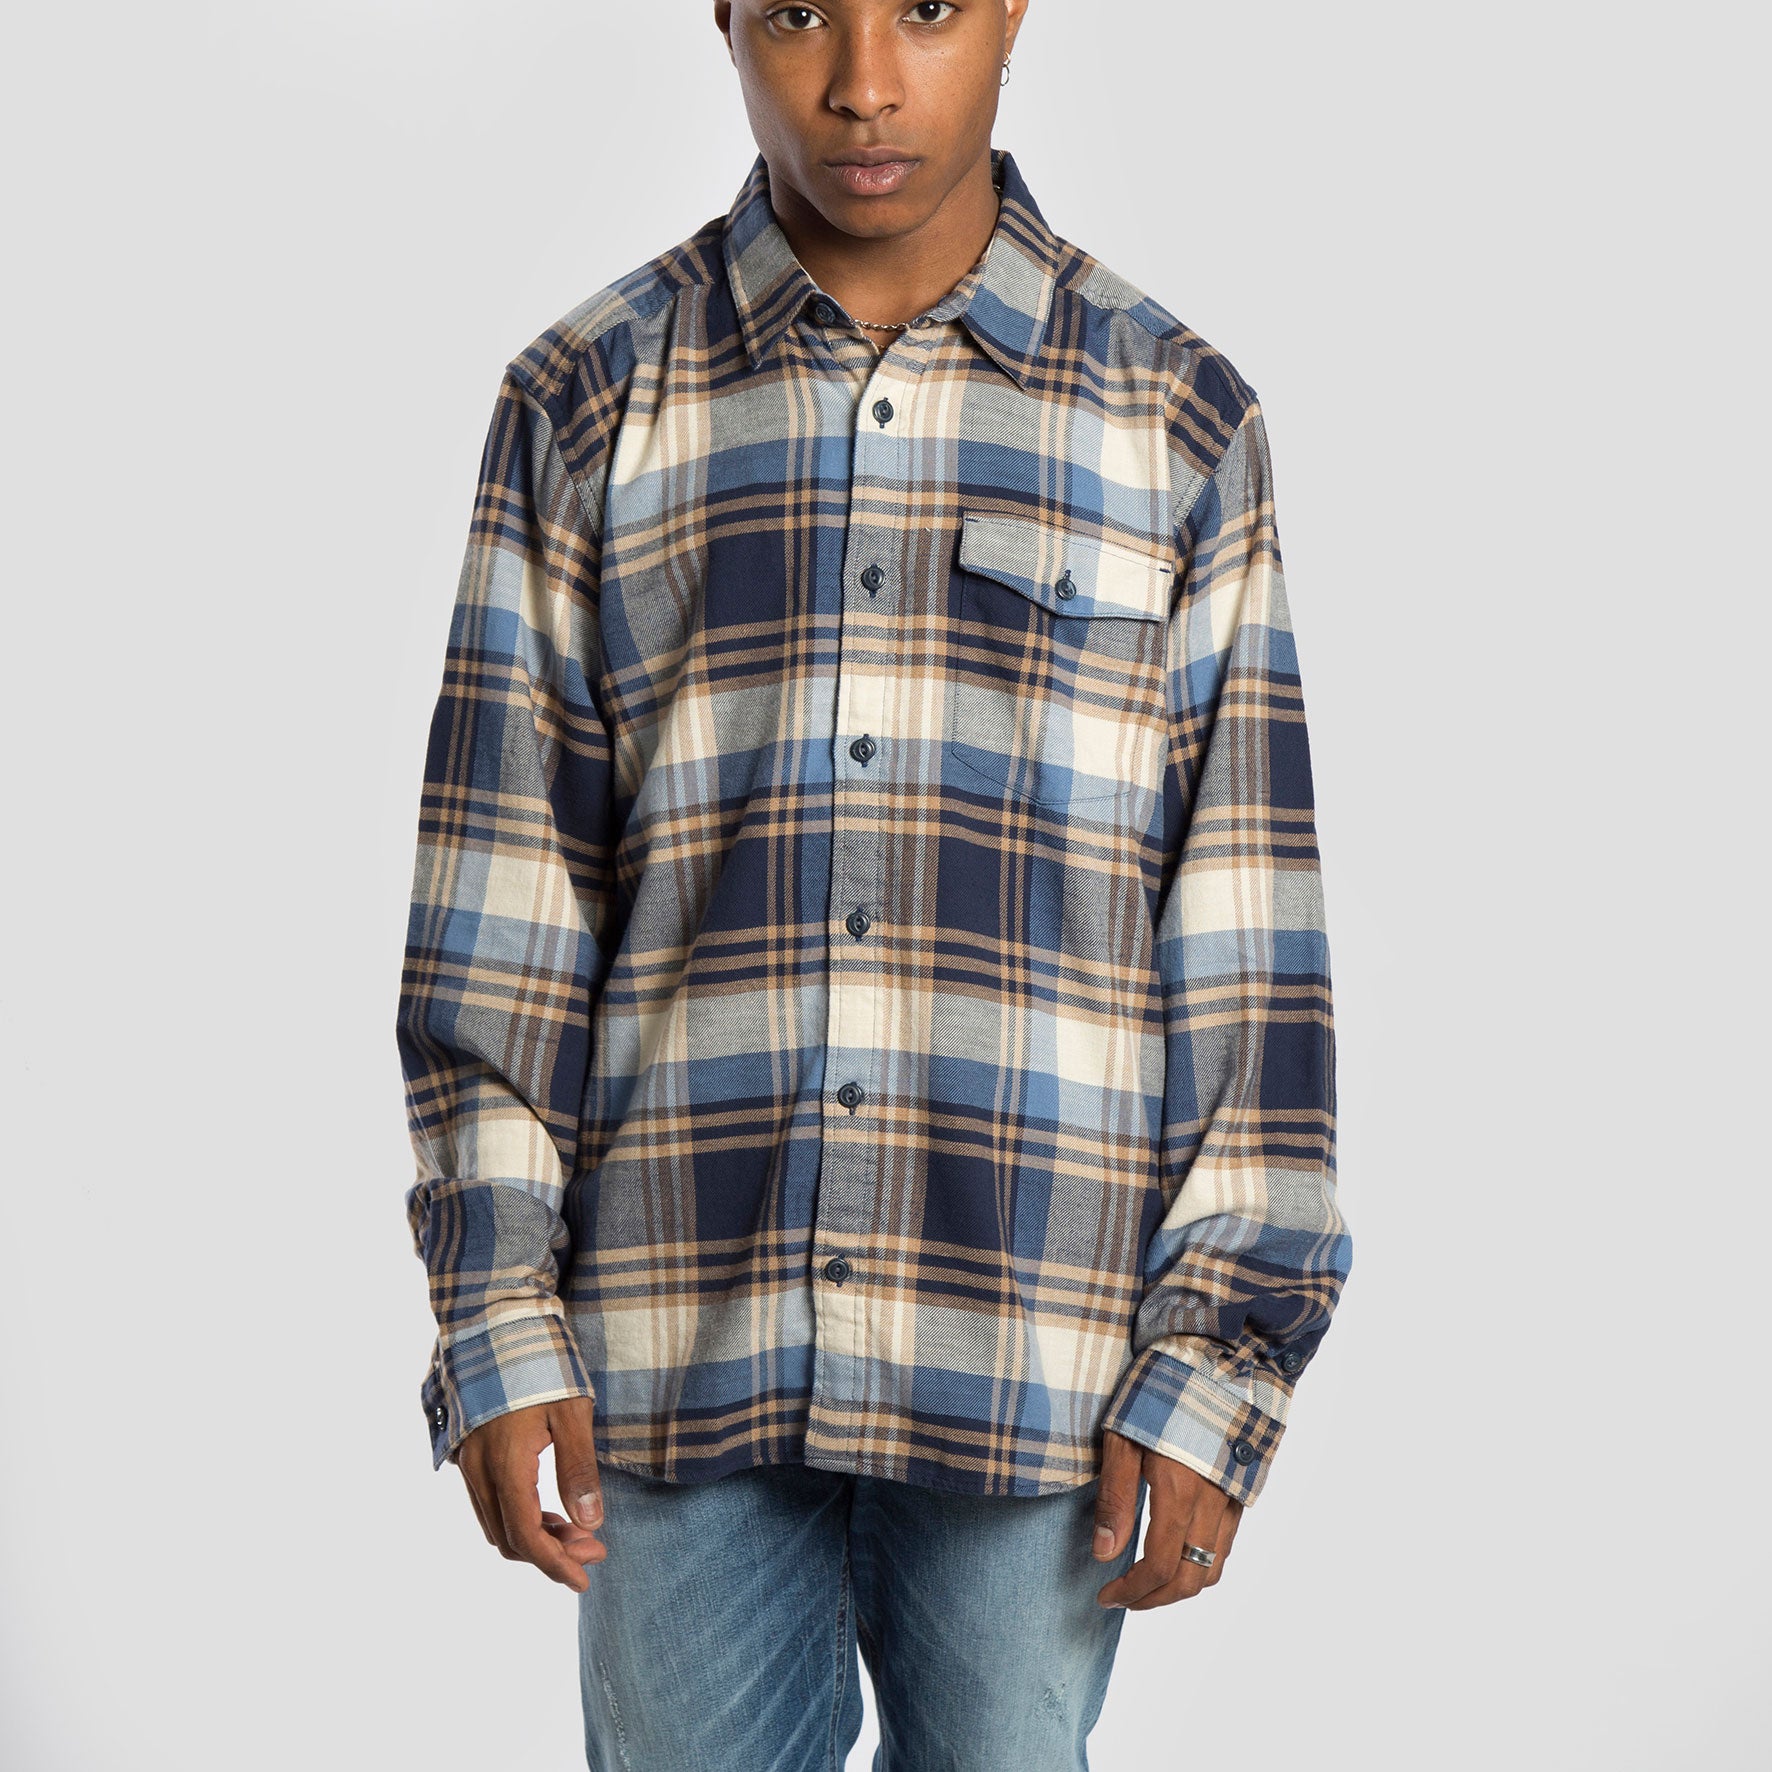 Patagonia Camisa Lw Fjord Flannel - 54020-BSN - Colección Chico